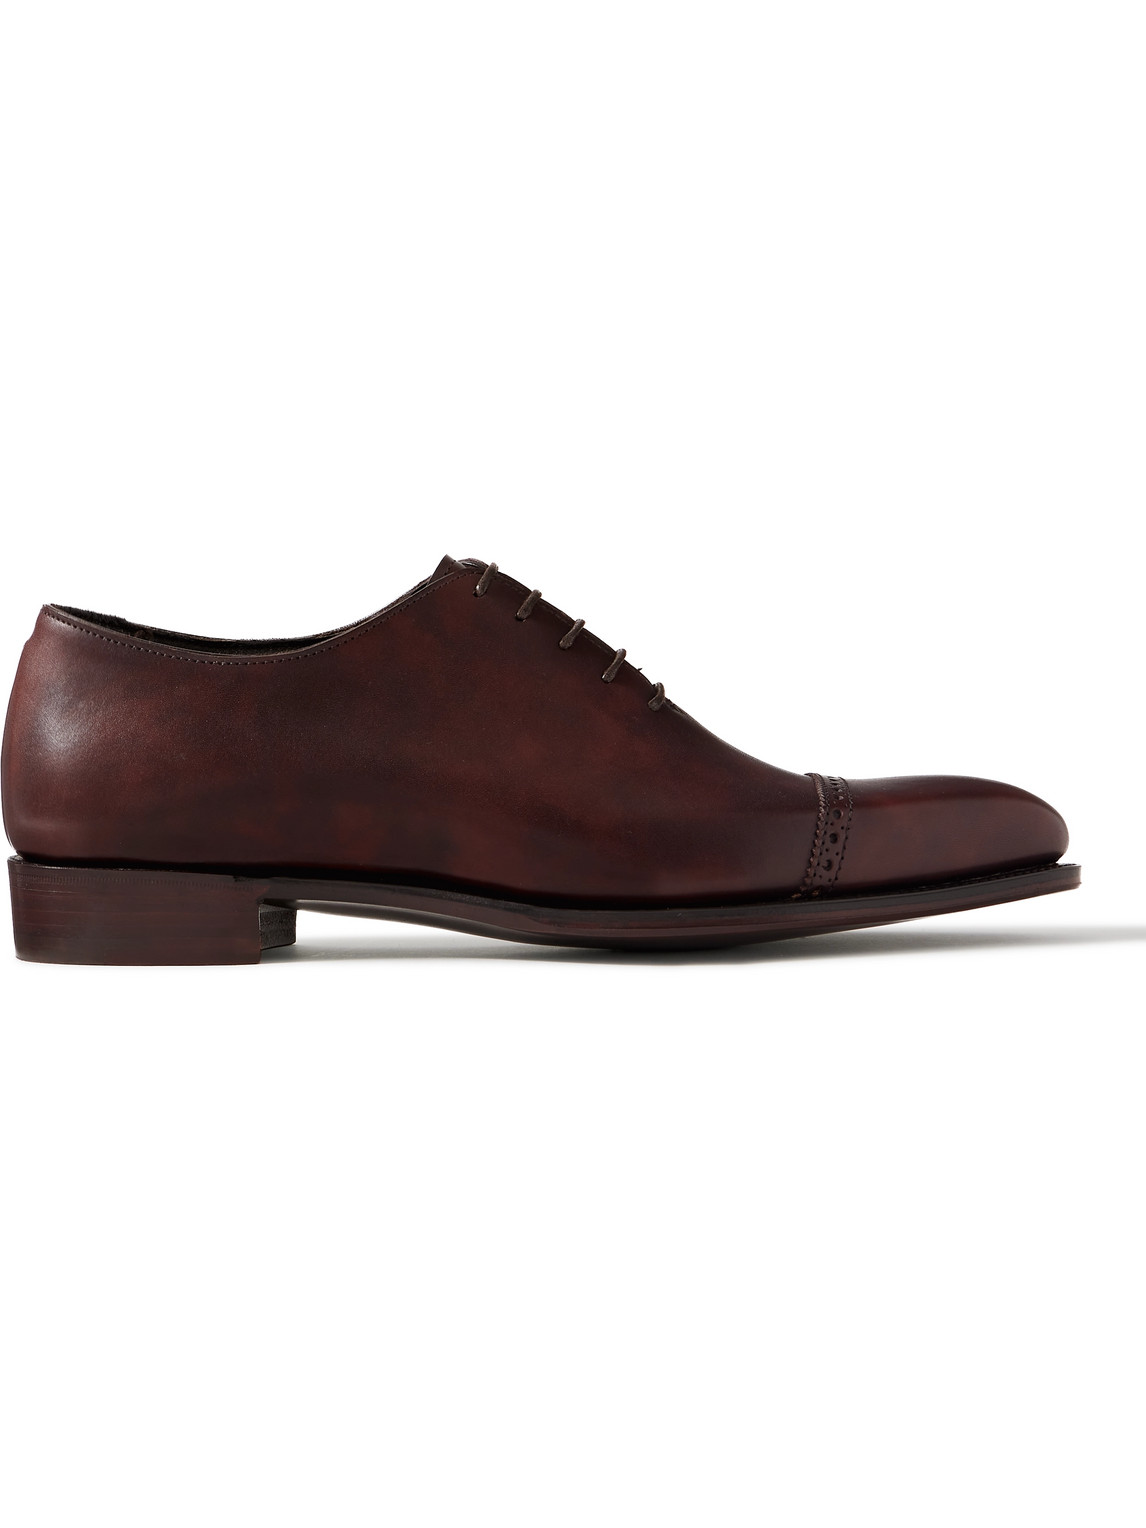 George Cleverley Melvin Cap-toe Leather Oxford Shoes In Brown